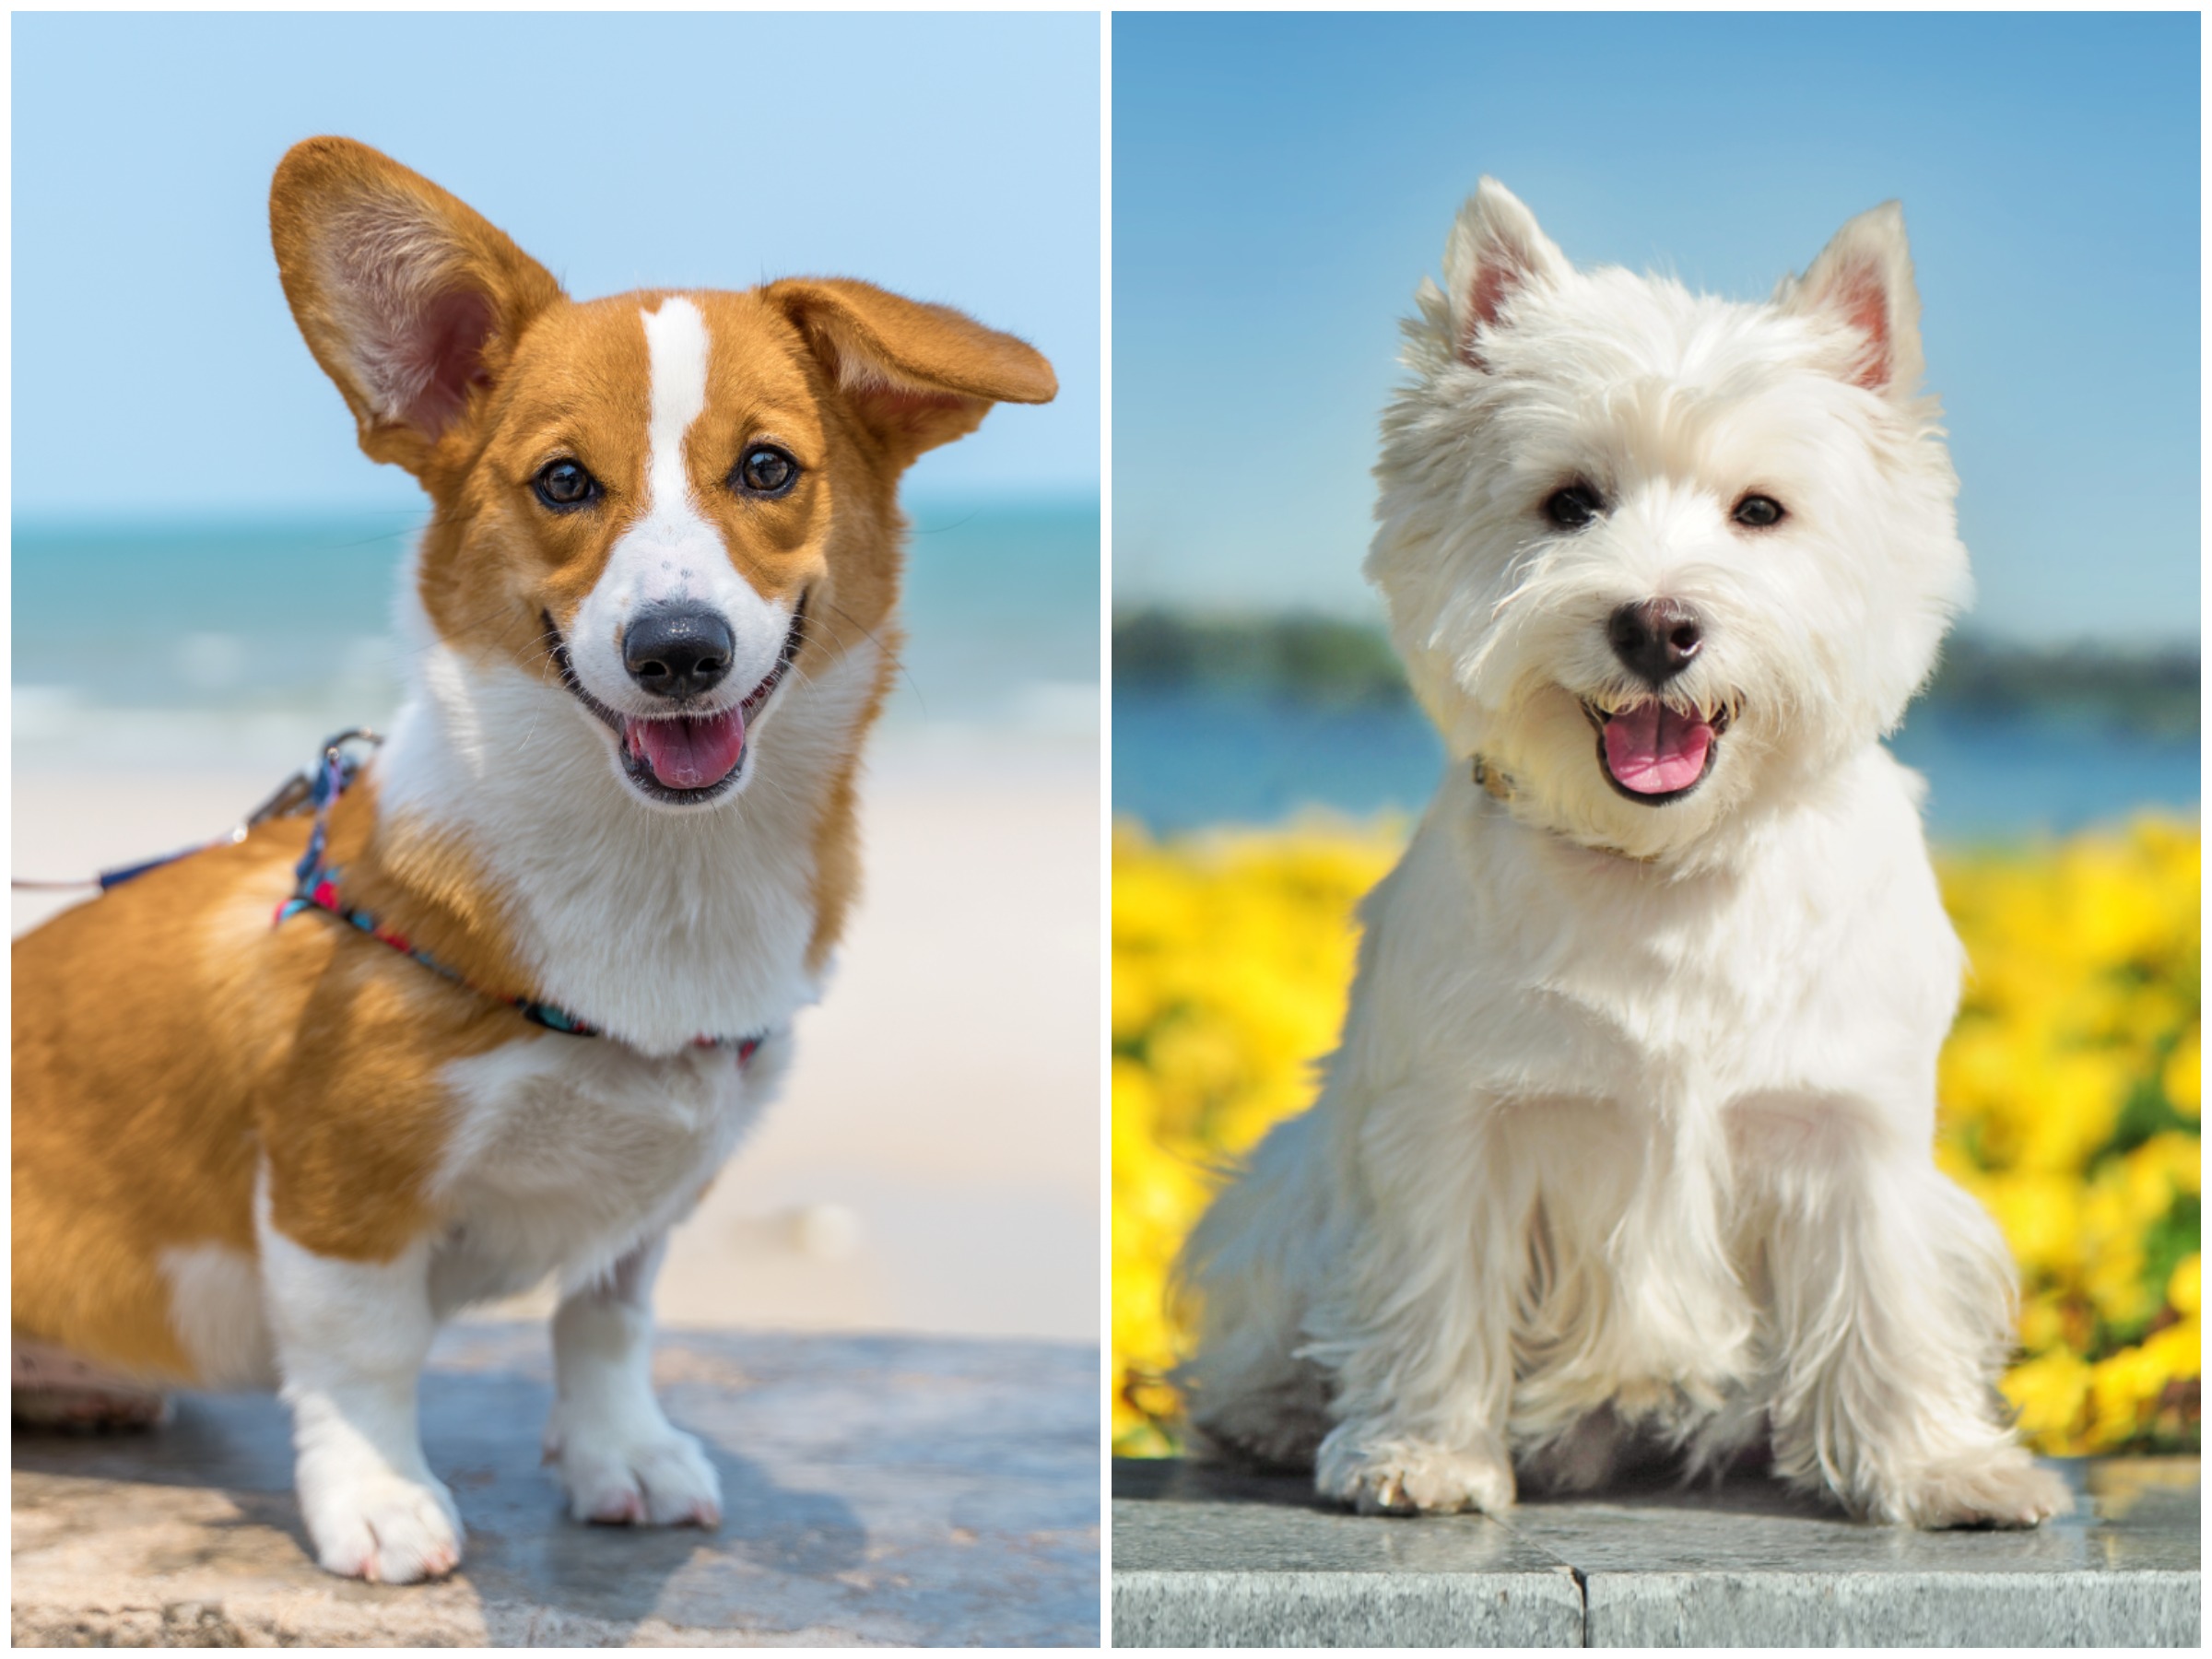 The 15 Most Popular Small Dog Breeds of 2020